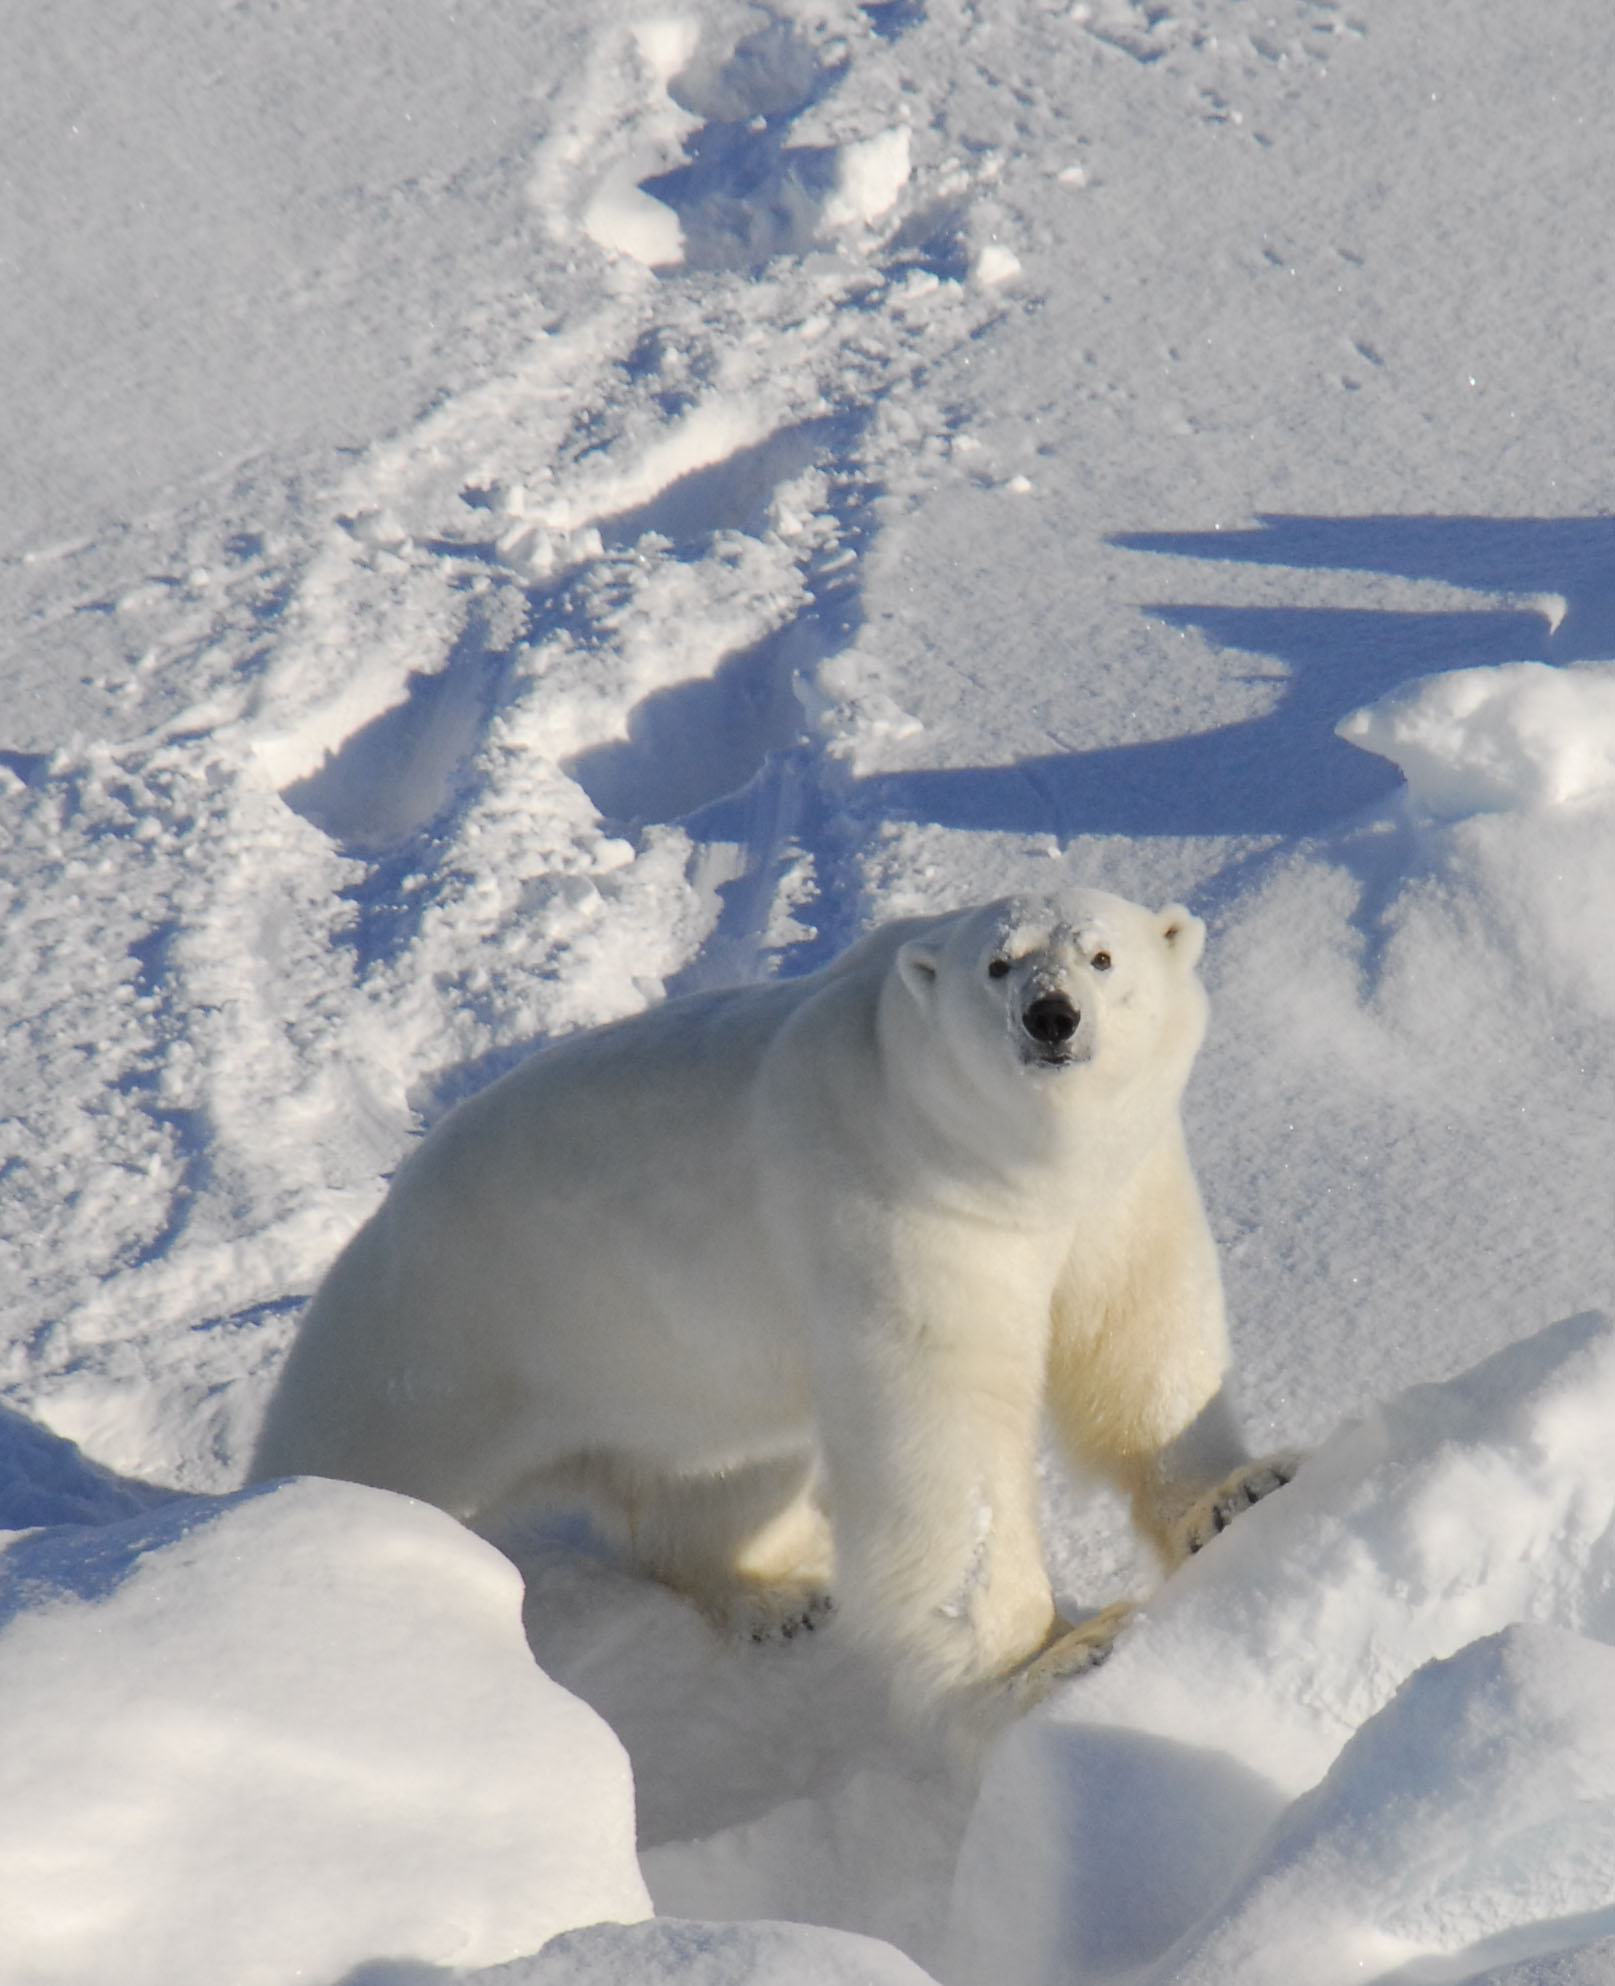 From brown to white – evolution of the polar bear